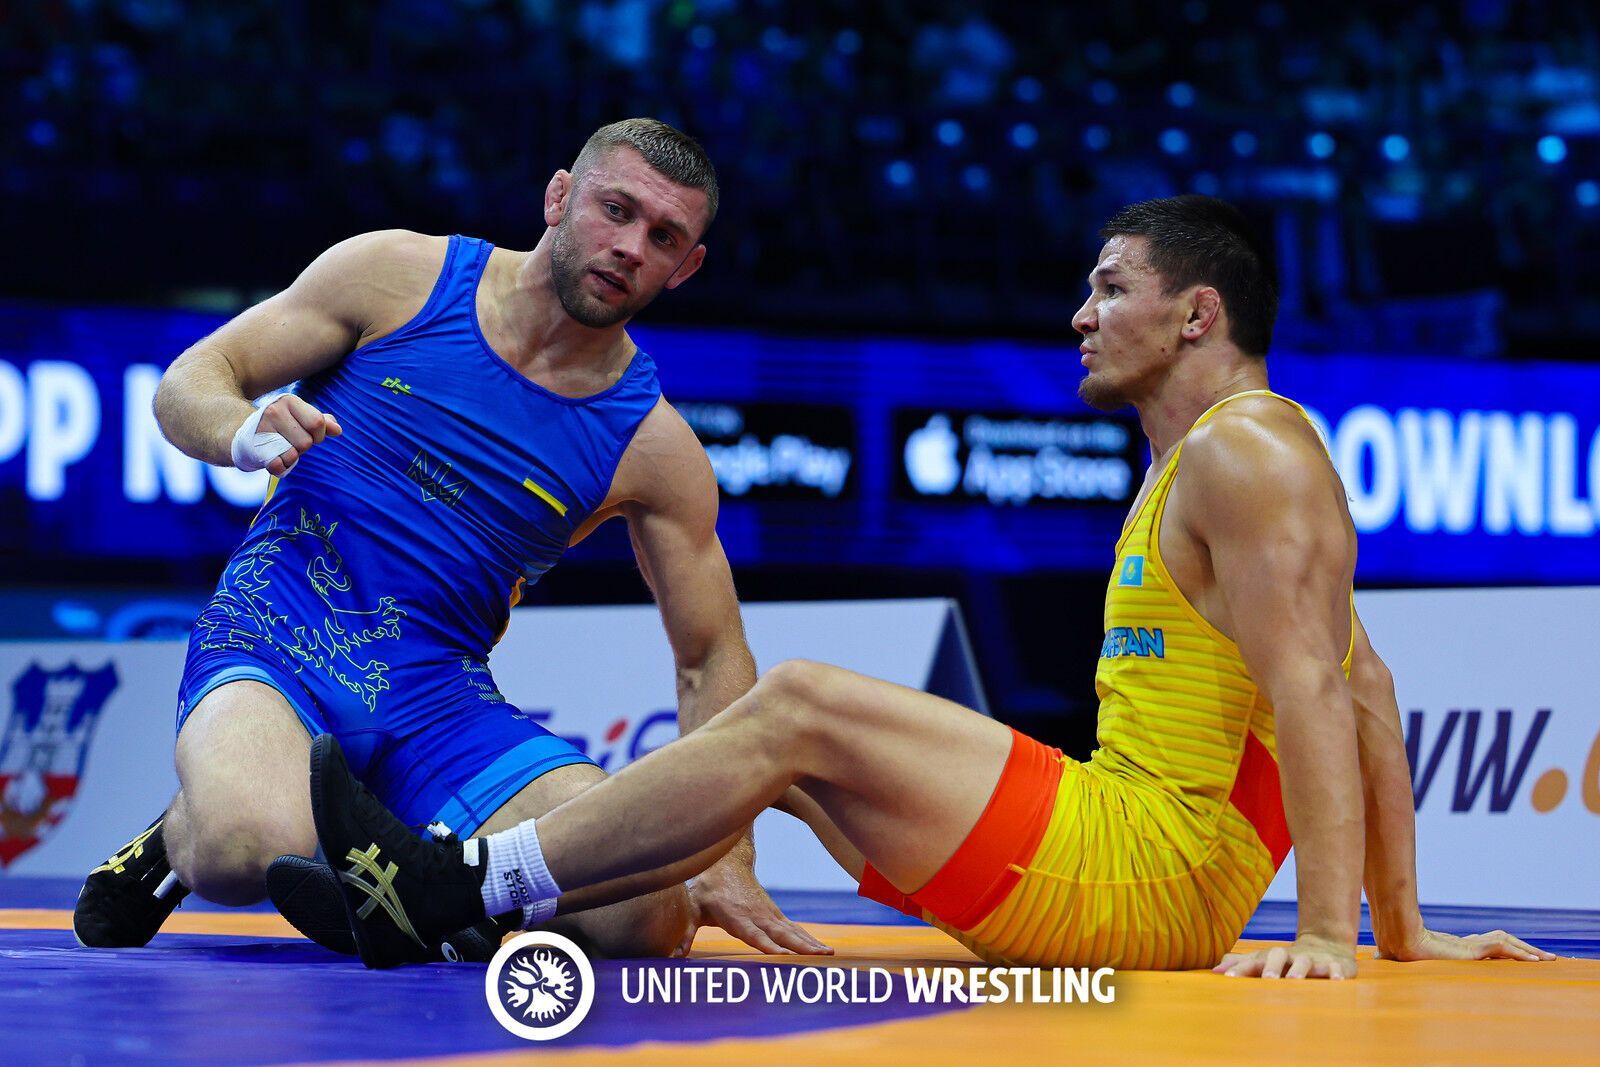 Ukrainian wrestler boycotts Russian at World Cup: Russian Federation responds with insults